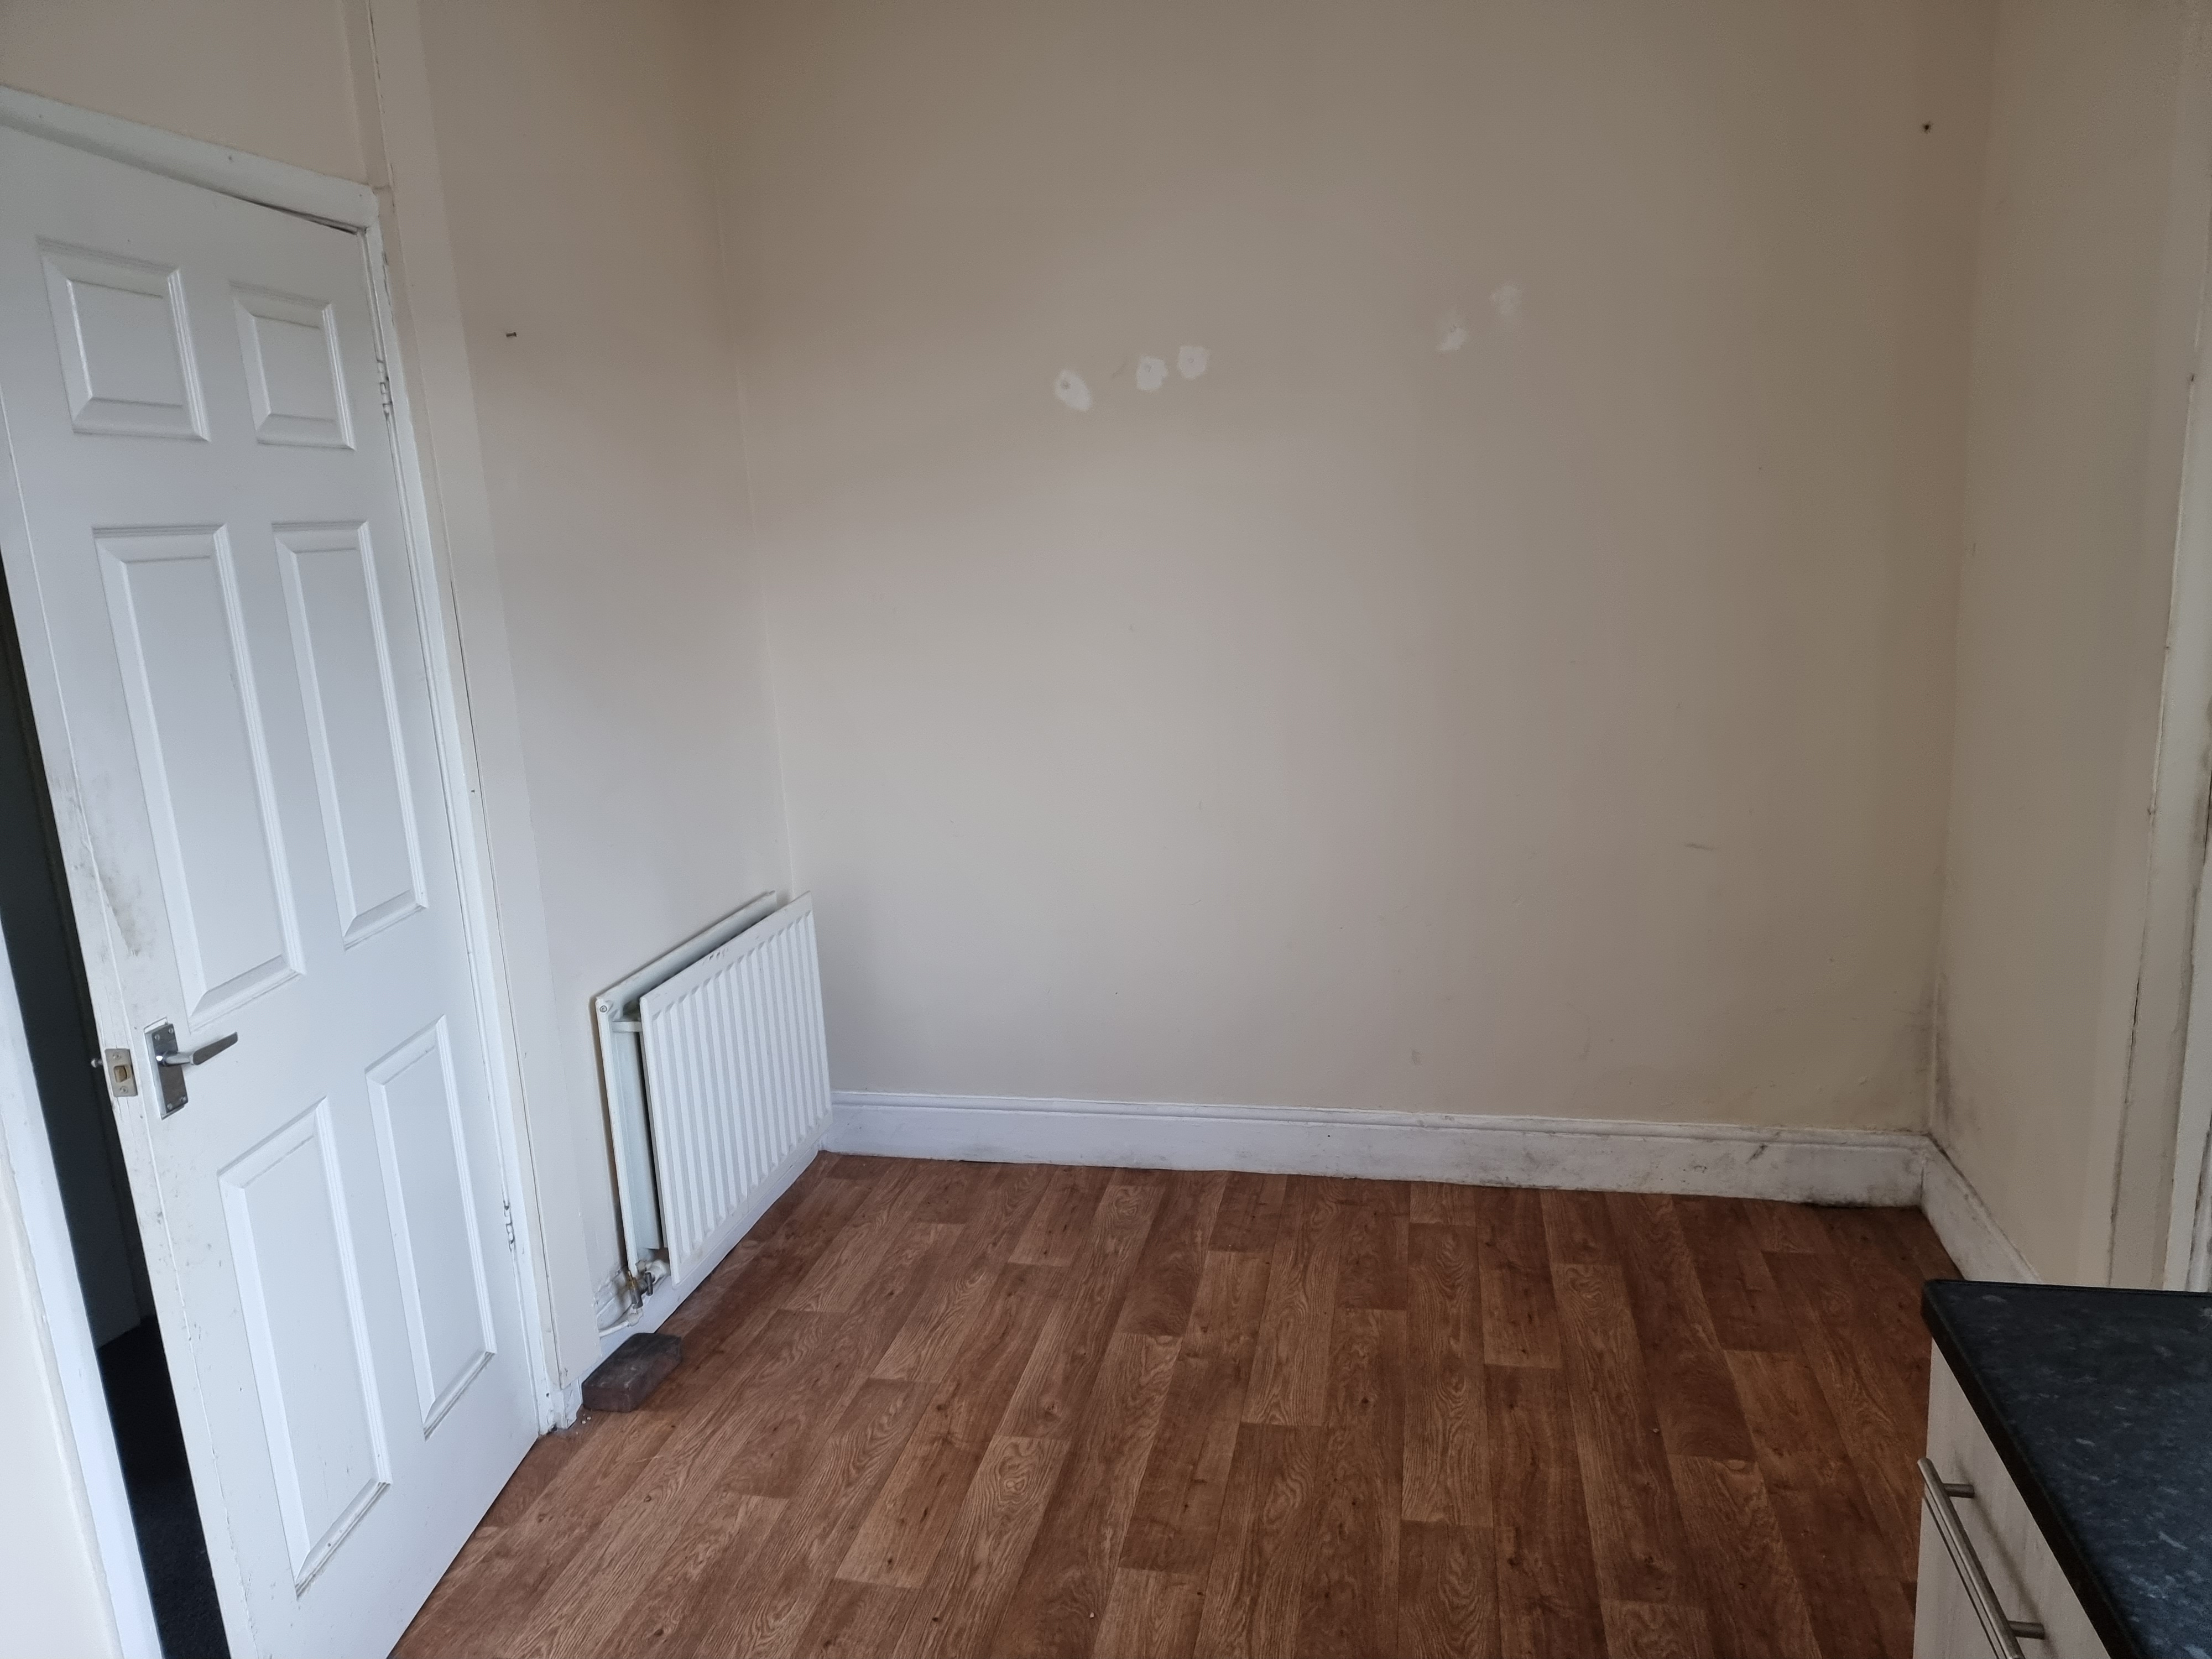 2 Bedroom Terraced to rent in Ferryhill - Mashroom